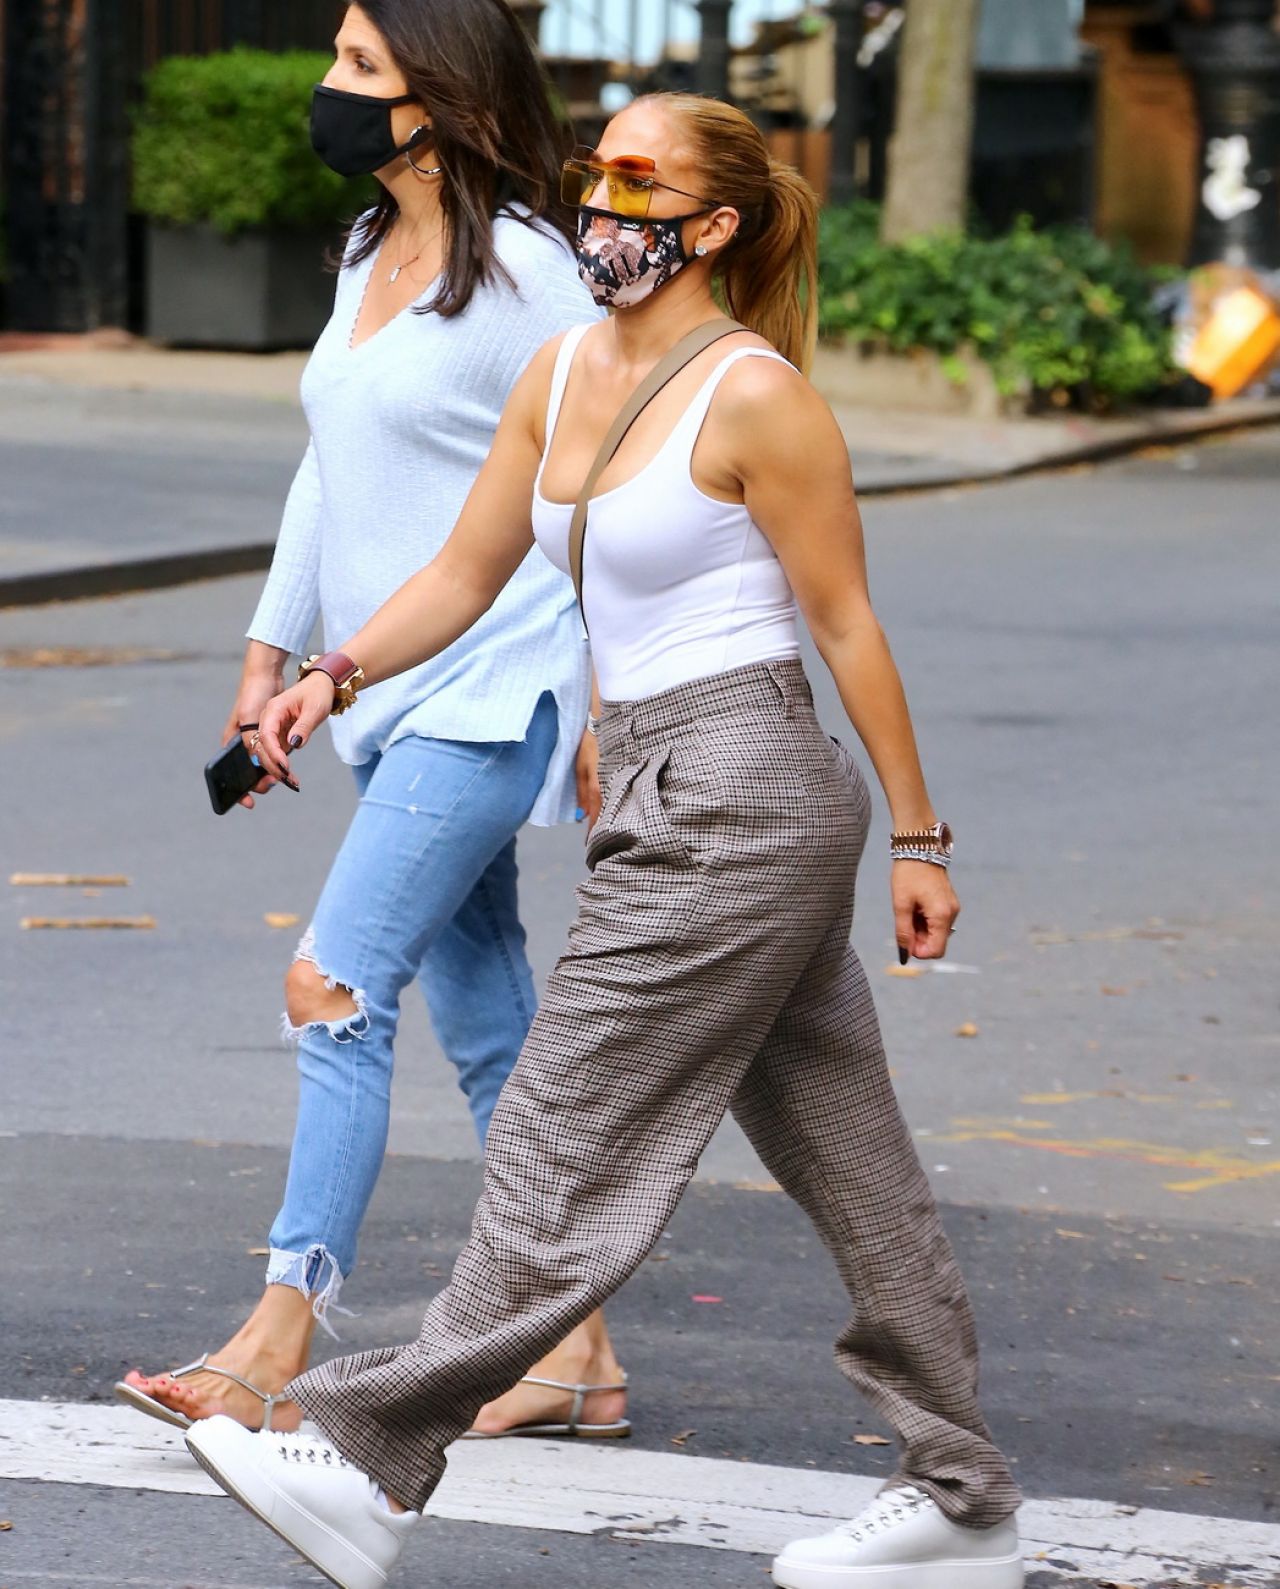 jennifer-lopez-with-her-sister-at-cipriani-downtown-in-nyc-09-07-2020-12.jpg